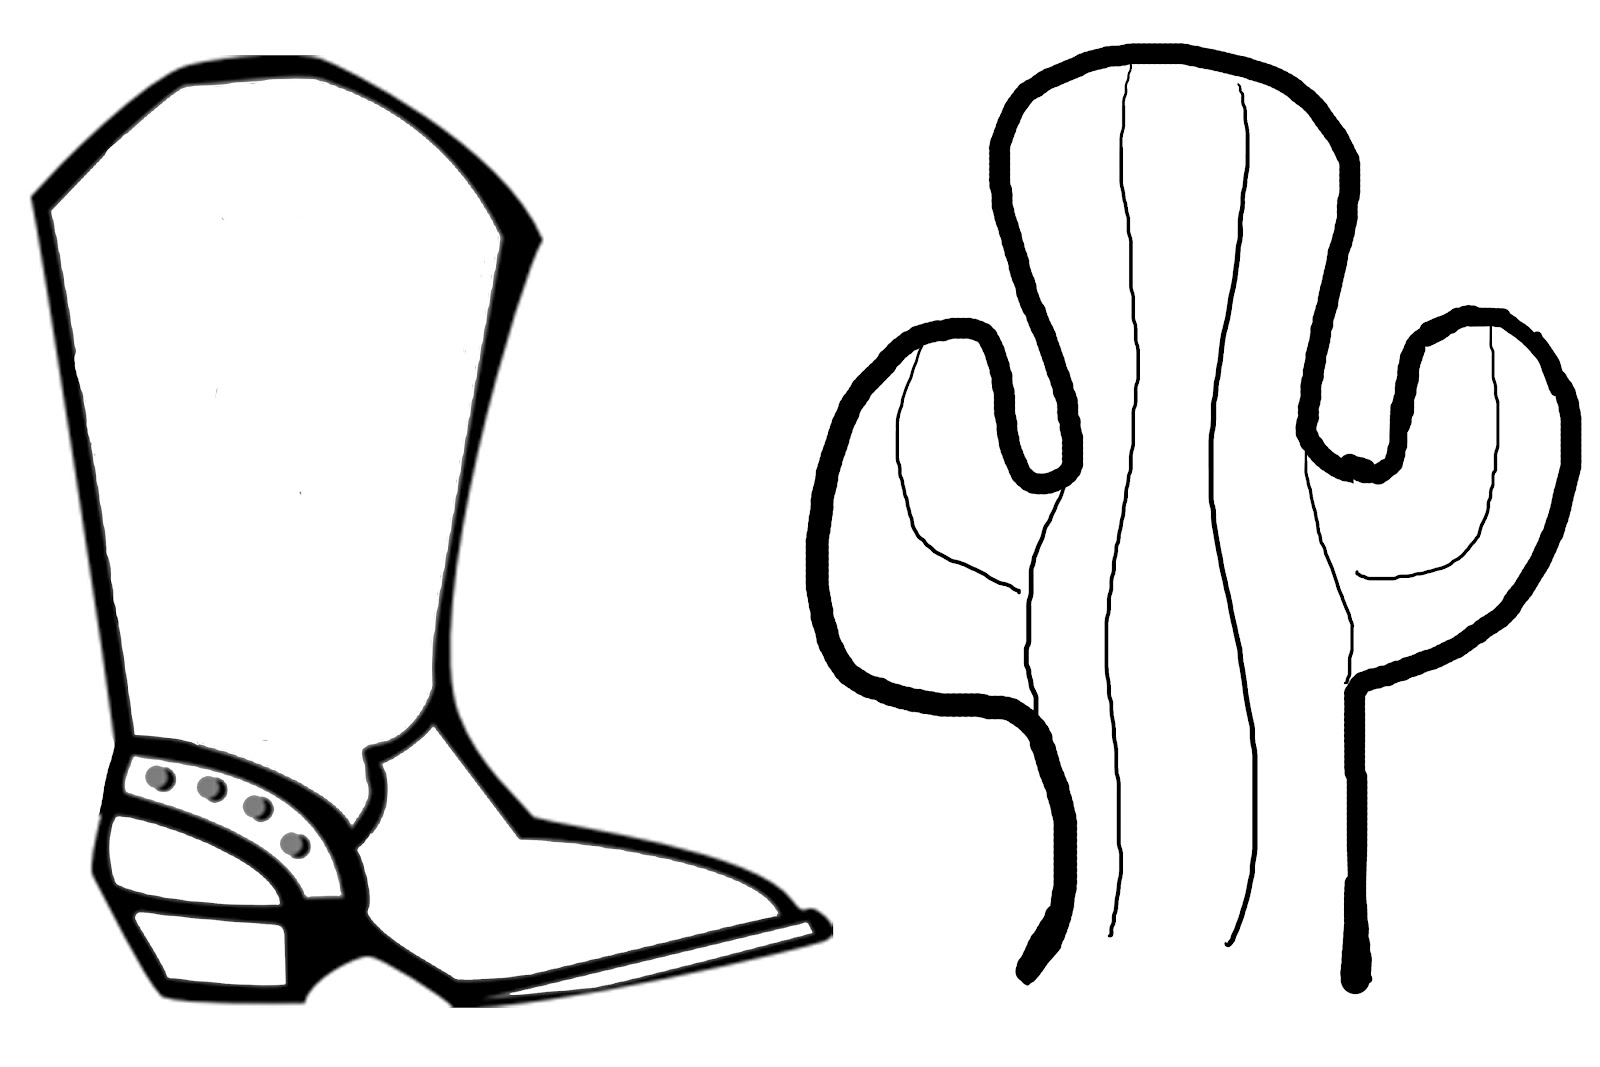 Cowboy Boots Coloring Page | GuthrieMedia